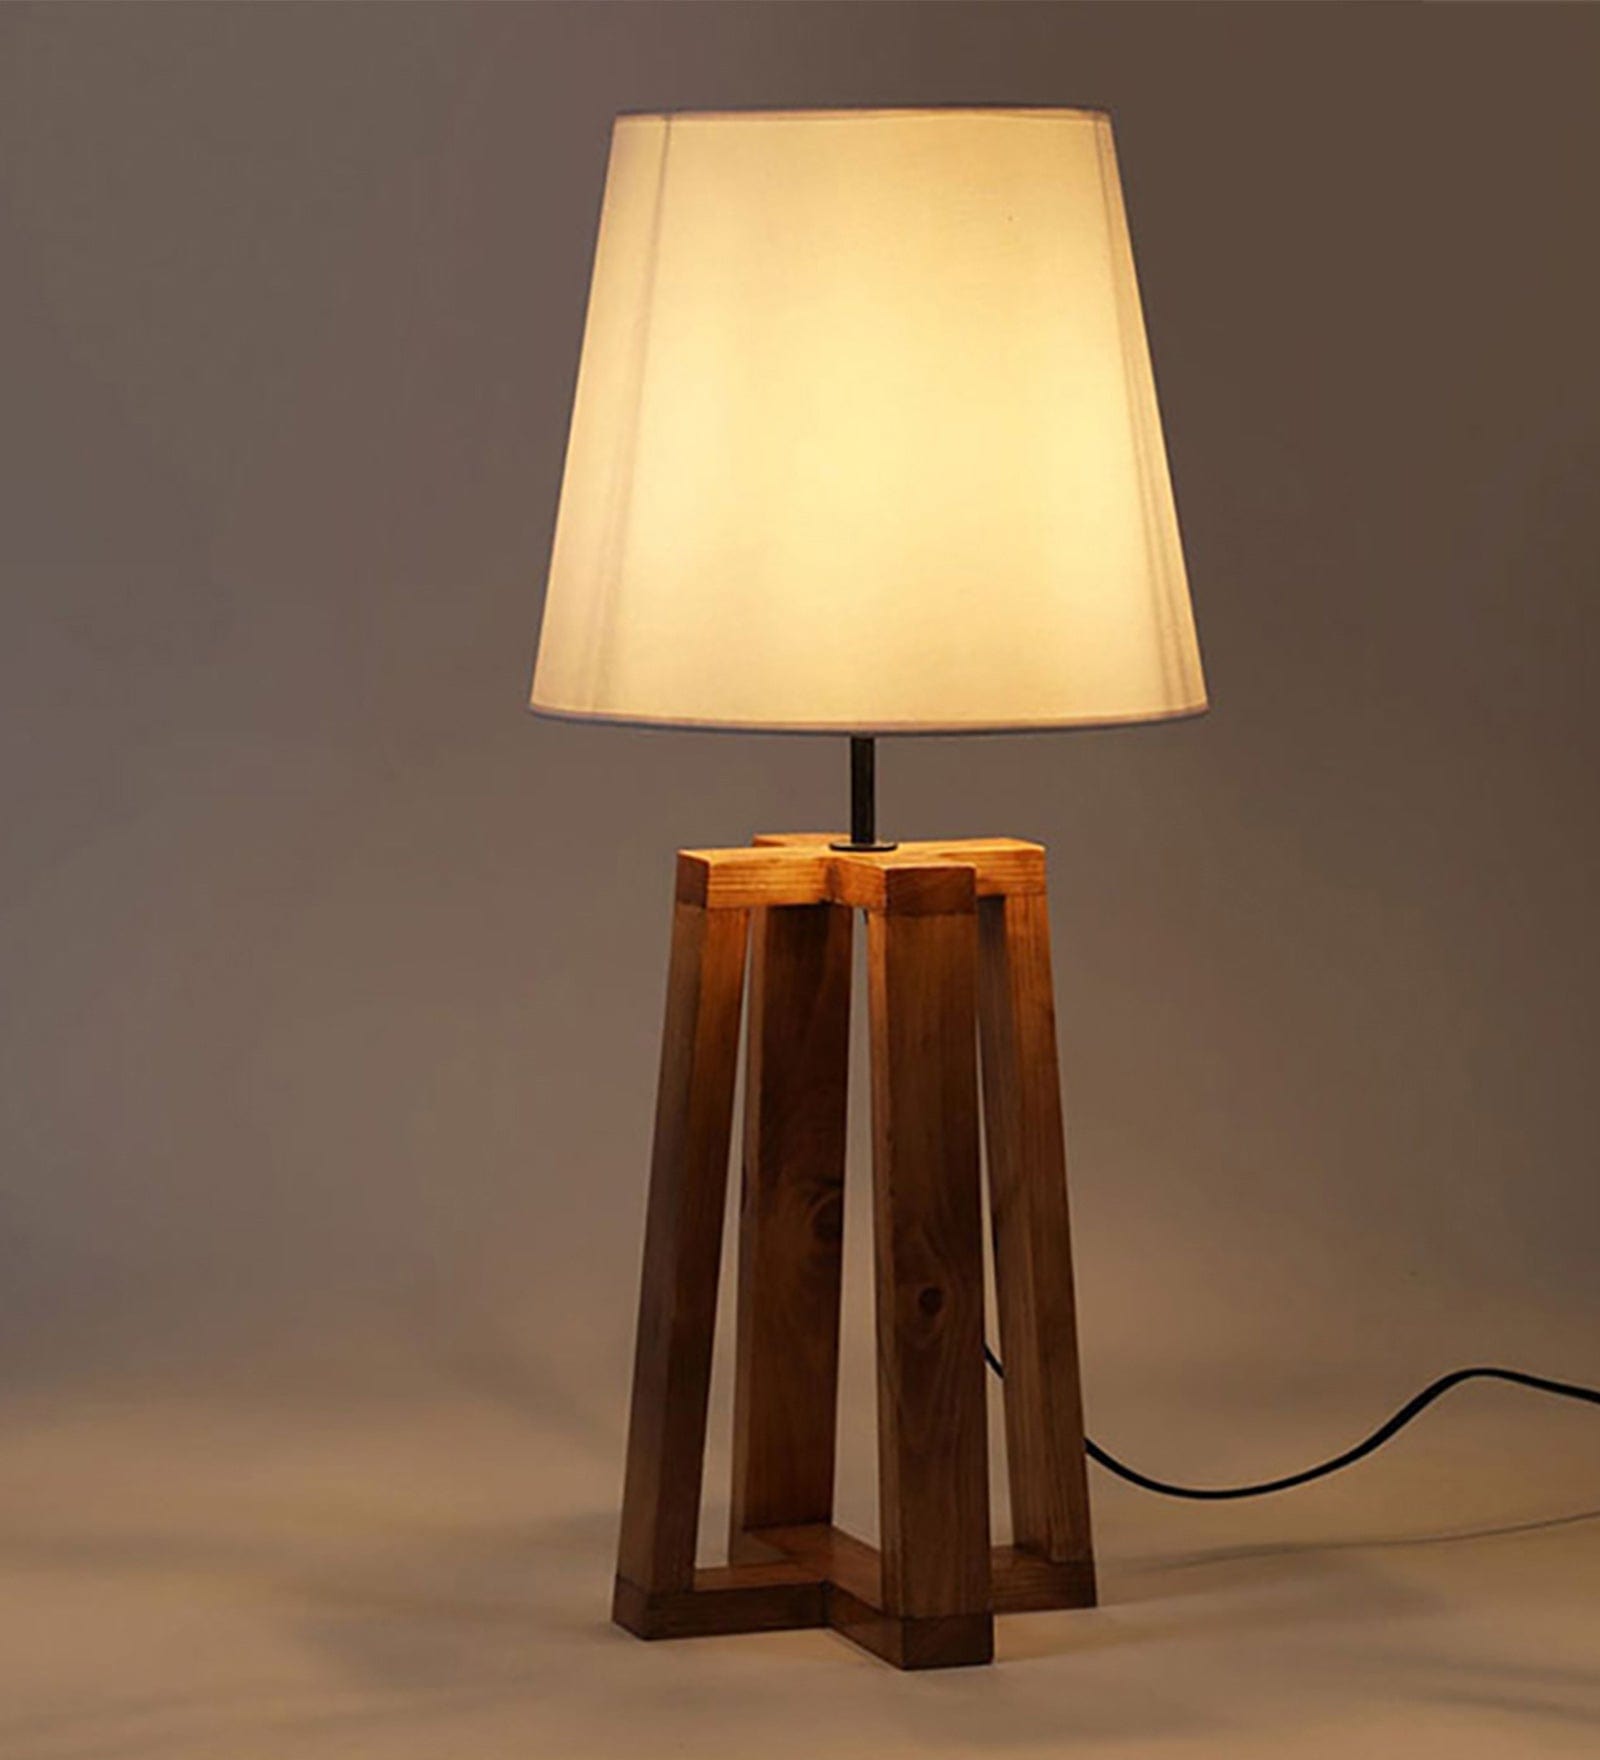 Blender Brown Wooden Table Lamp with White Fabric Lampshade (BULB NOT INCLUDED)